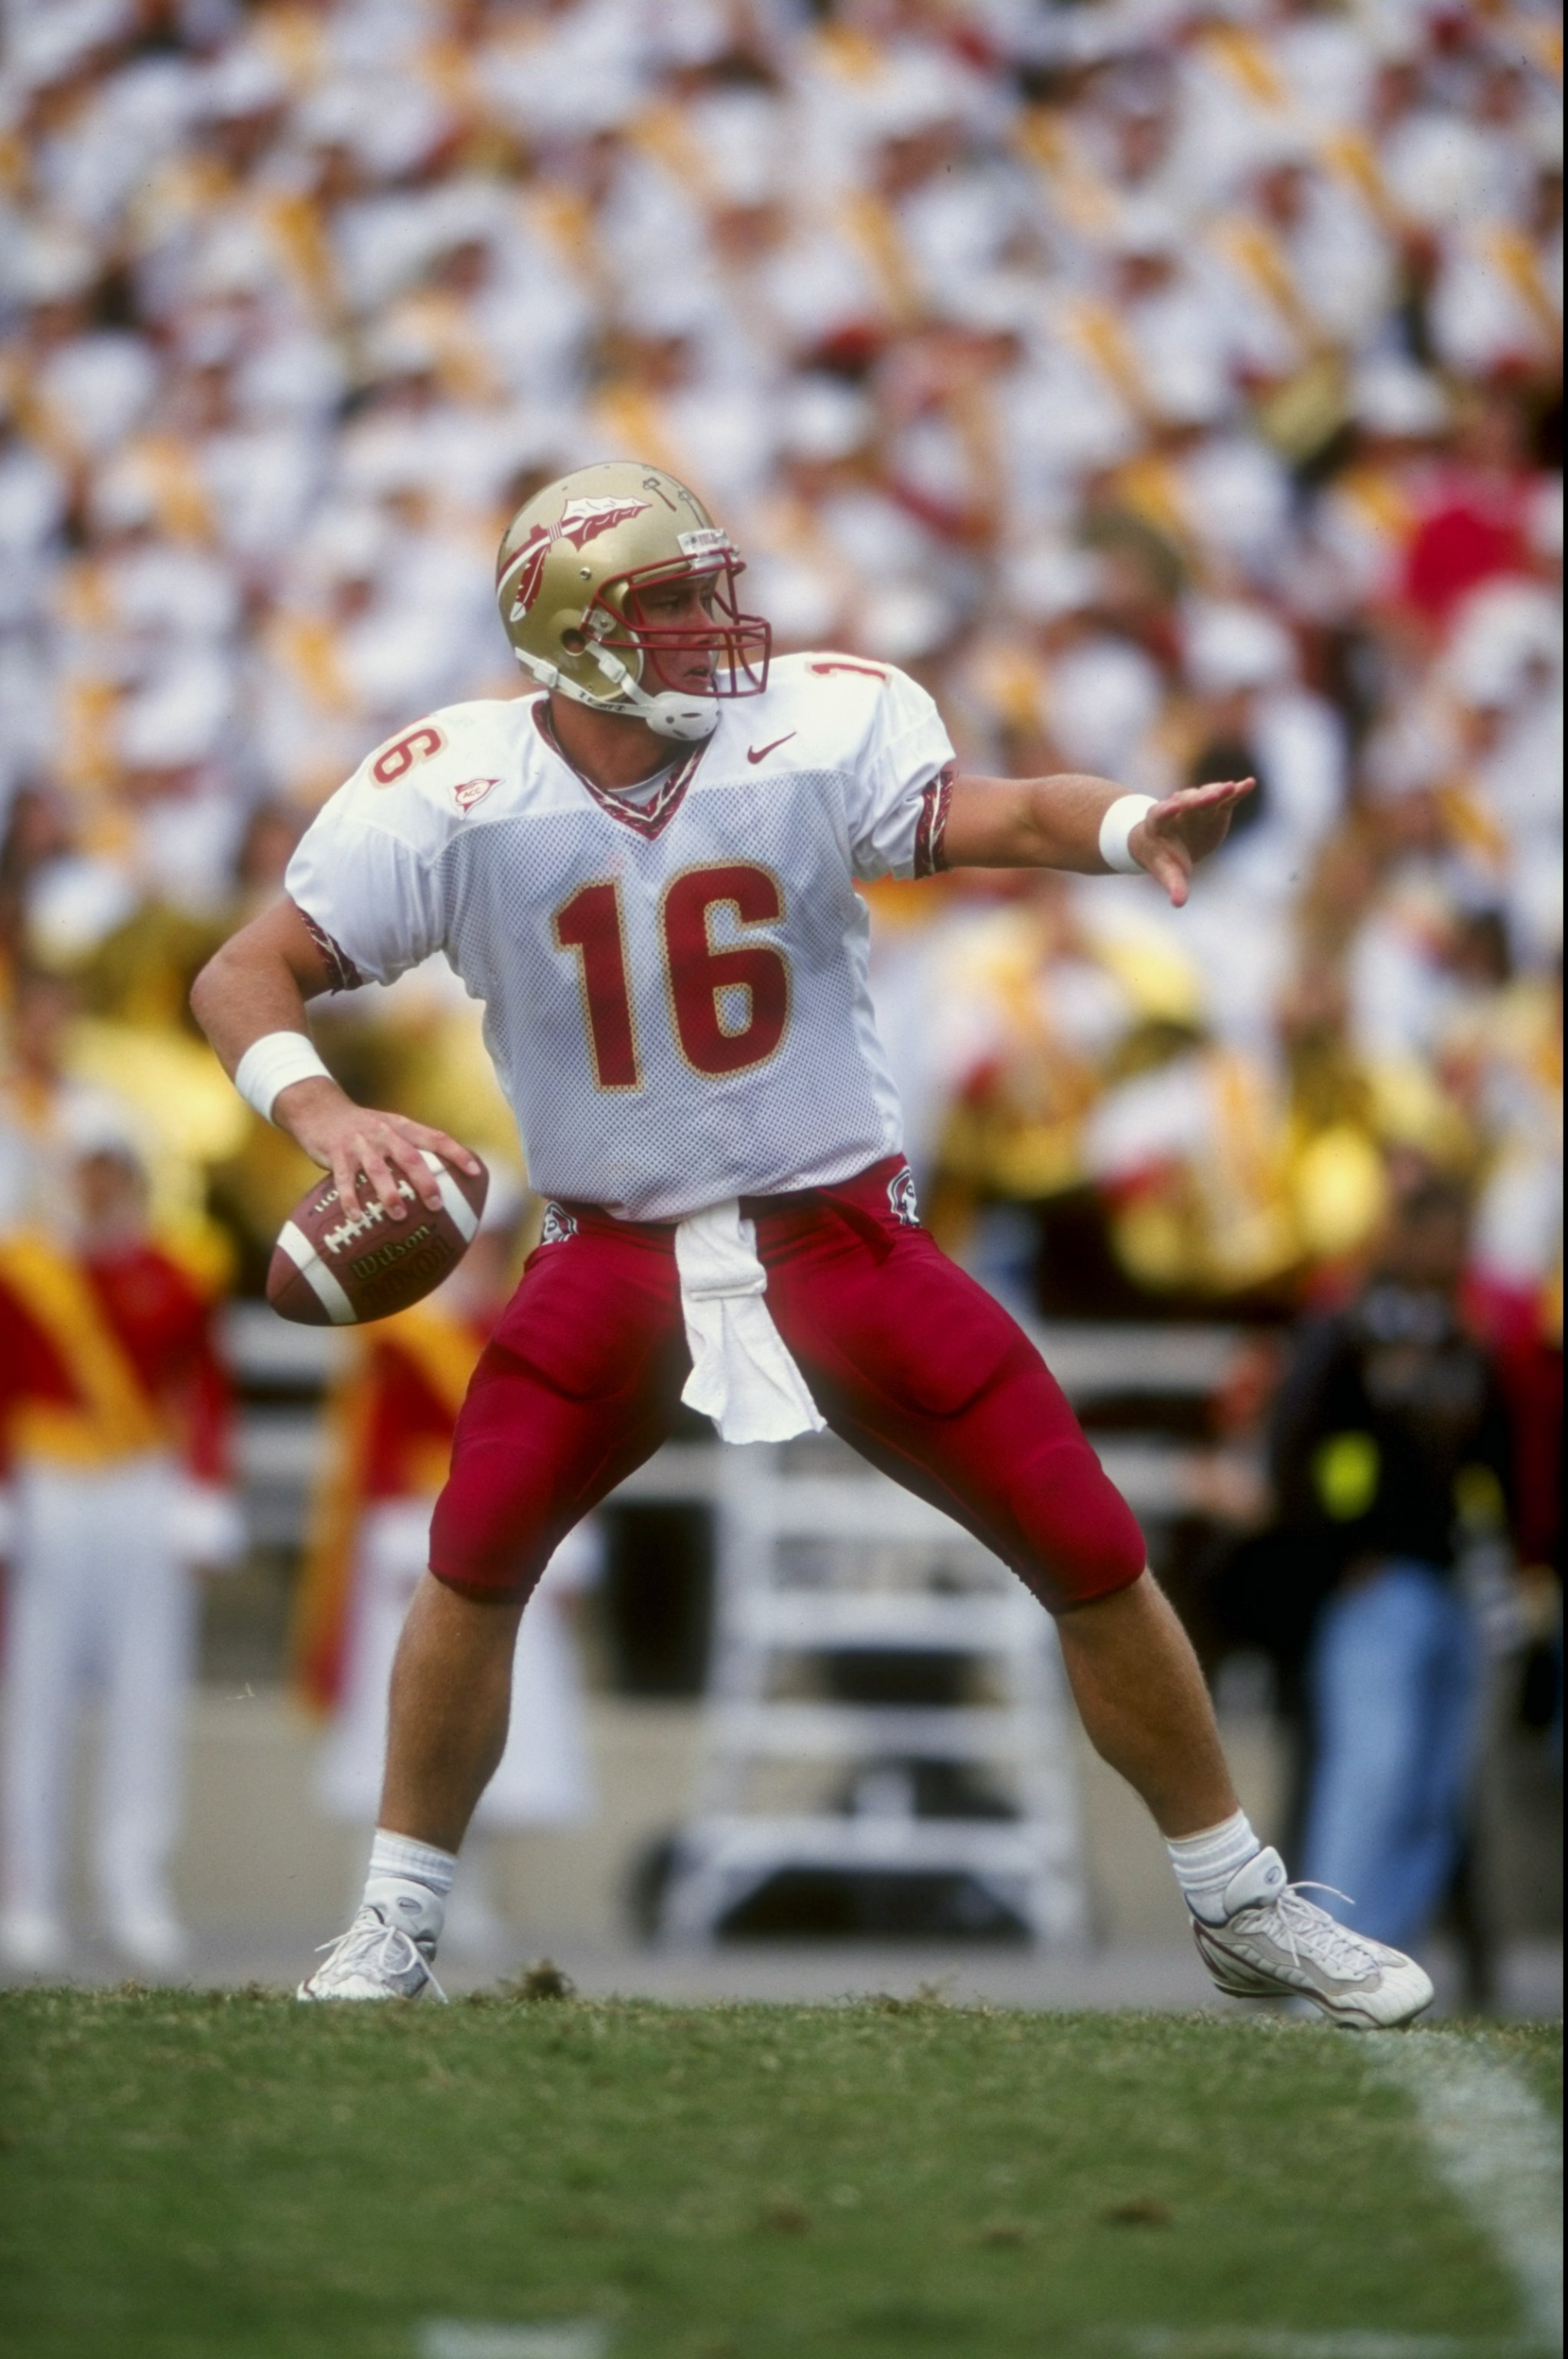 3 Oct 1998:  Quarterback Chris Weinke #16 of the Florida State Seminoles prepares to throw a pass during a game against the Maryland Terrapins at the Byrd Stadium in College Park, Maryland. The Seminoles defeated the Terrapins 24-10.